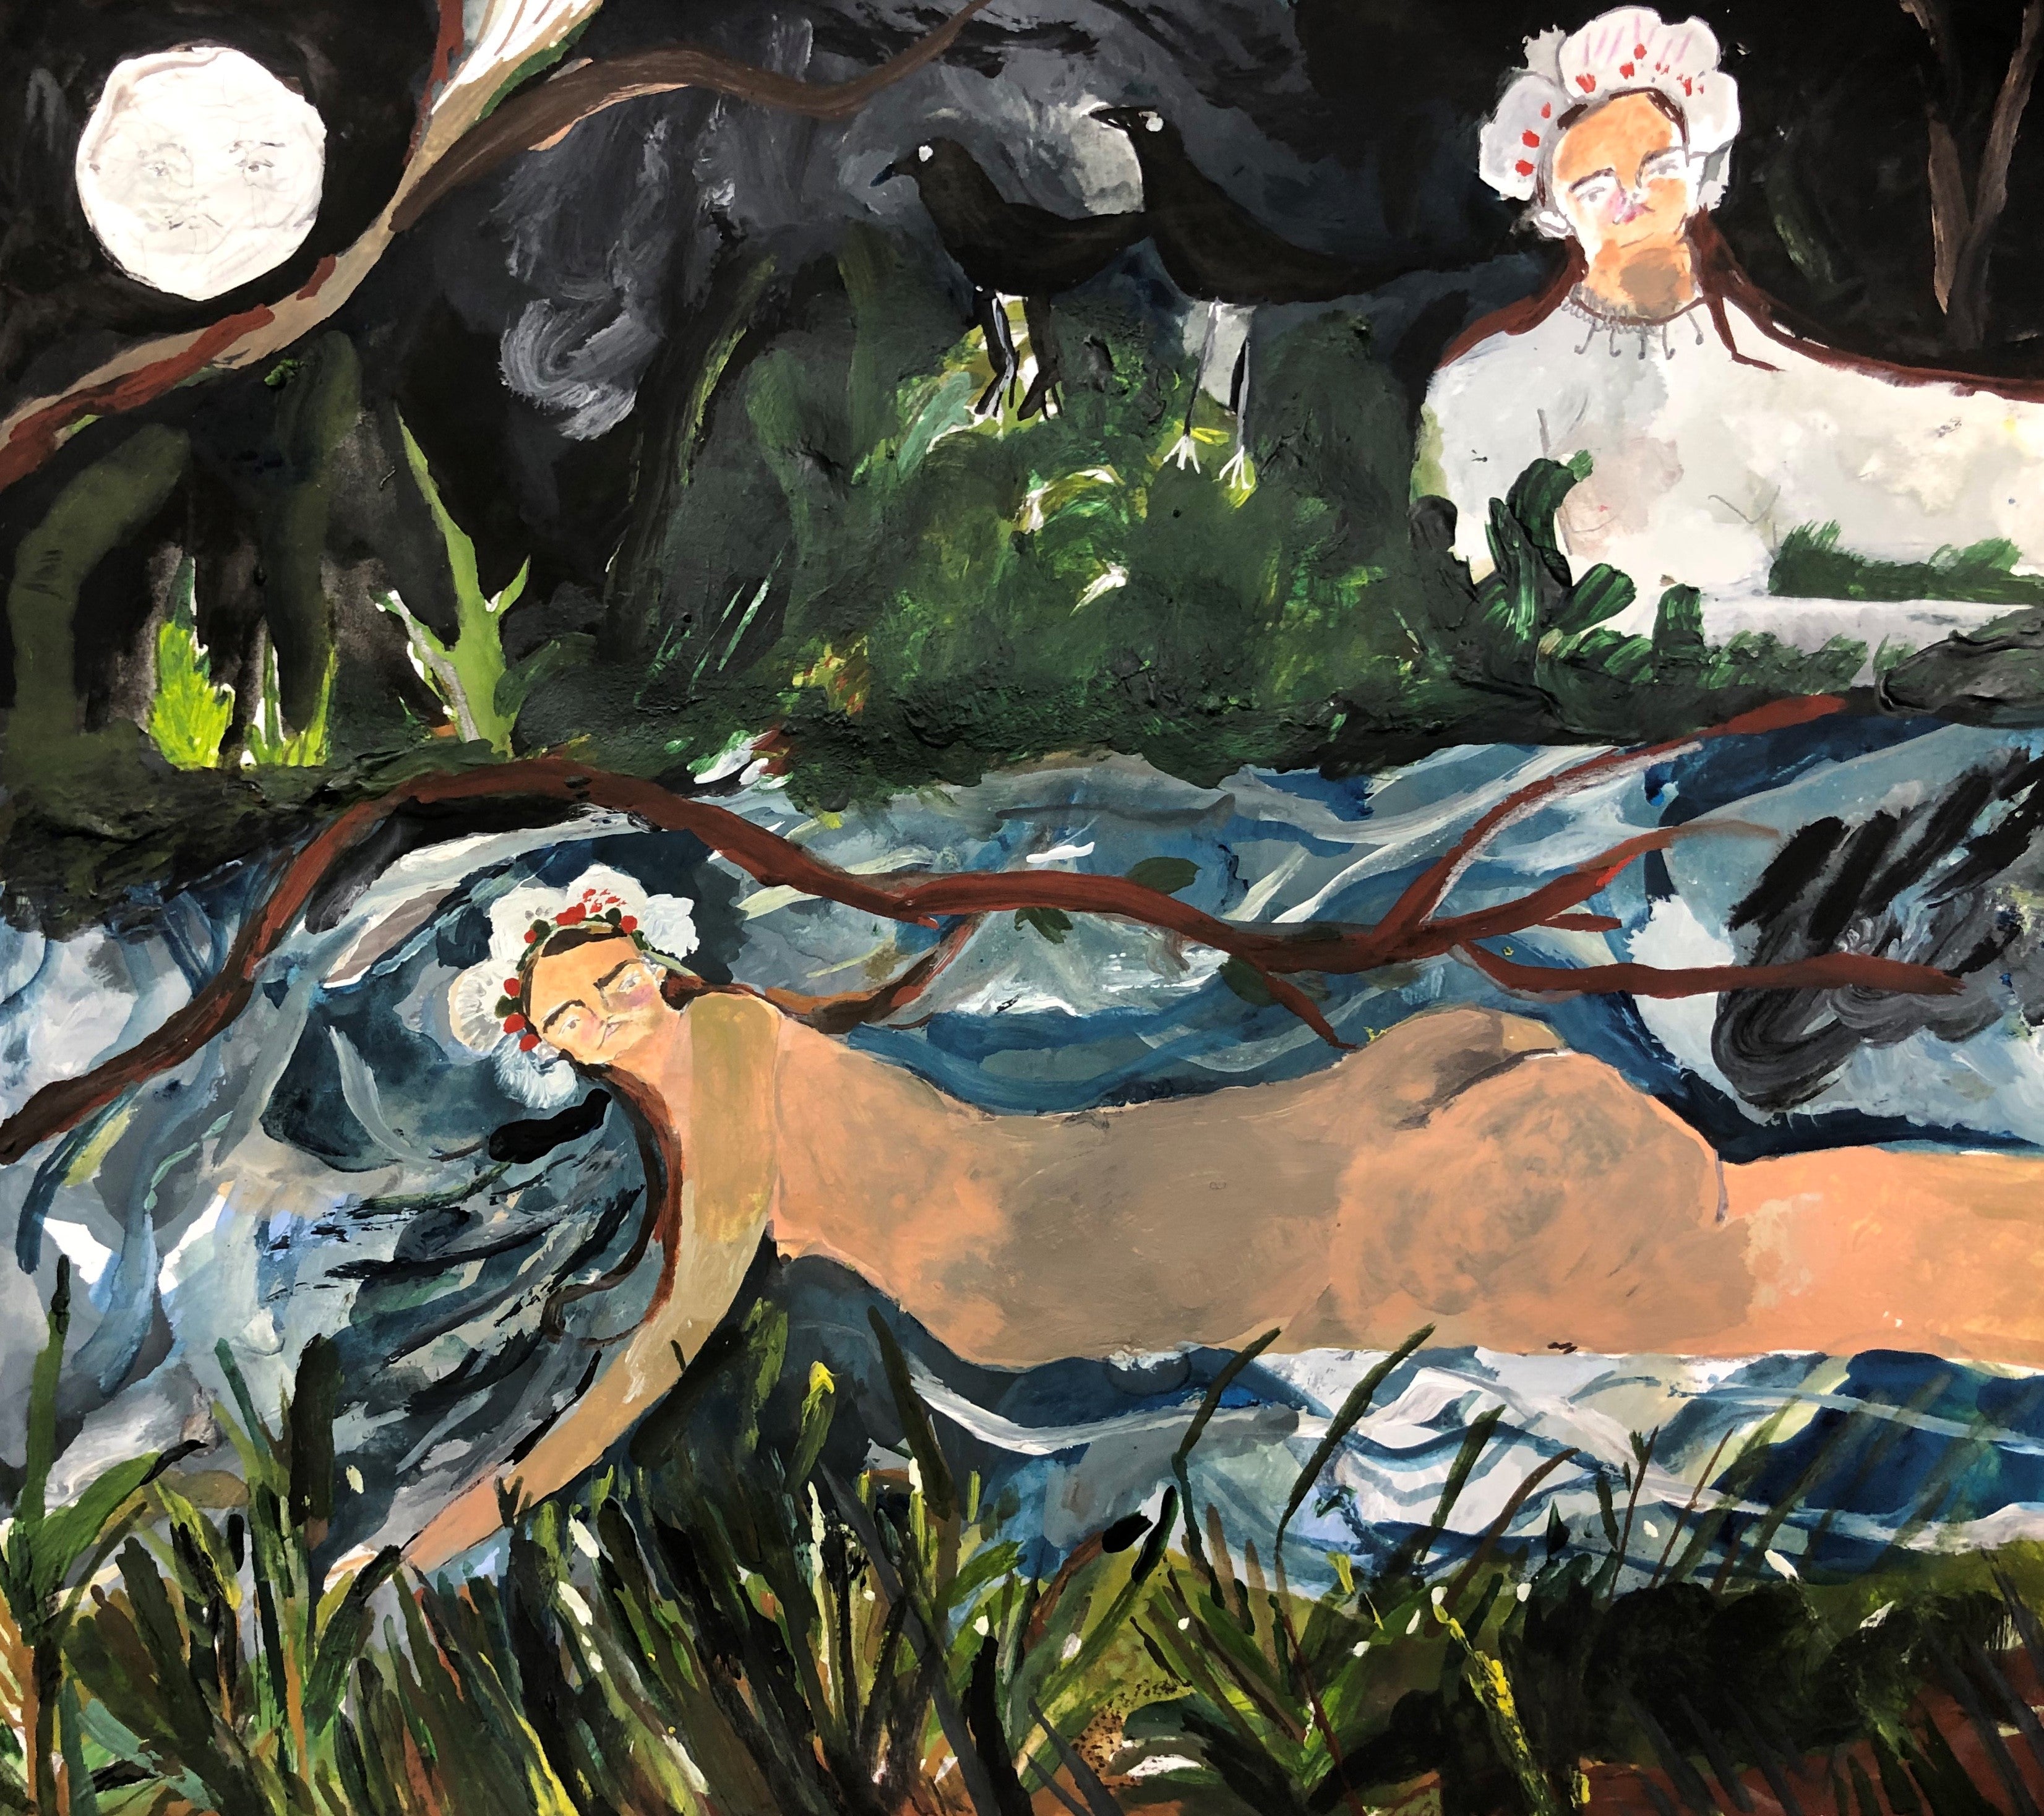 Melissa Kime 'Night Swimming with two crows for luck', 2020 Acrylic, gouache, coloured pencil, pencil on paper 25x25cm